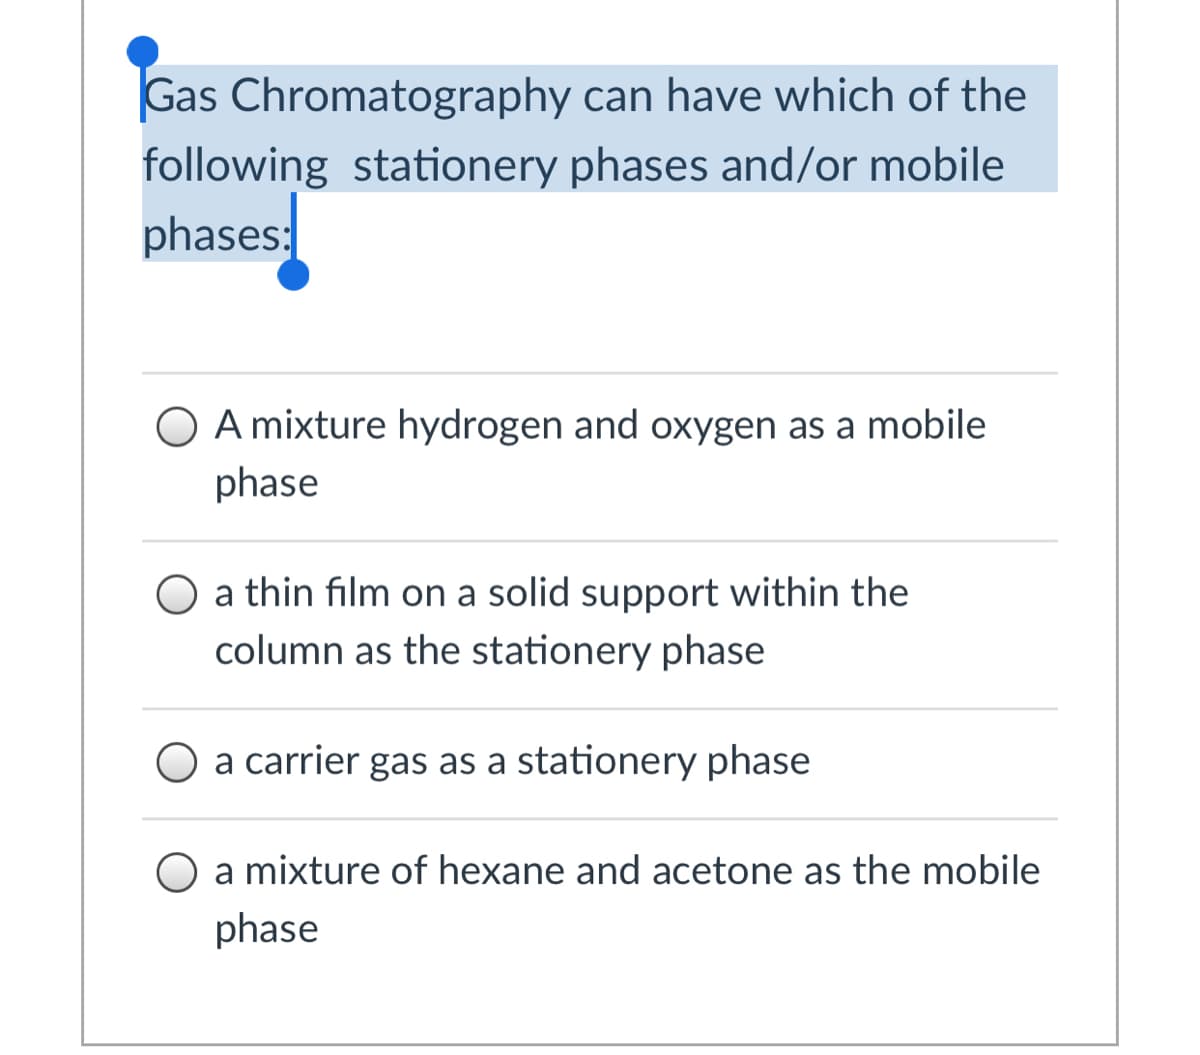 Gas Chromatography can have which of the
following stationery phases and/or mobile
phases:
A mixture hydrogen and oxygen as a mobile
phase
O a thin film on a solid support within the
column as the stationery phase
O a carrier gas as a stationery phase
O a mixture of hexane and acetone as the mobile
phase
